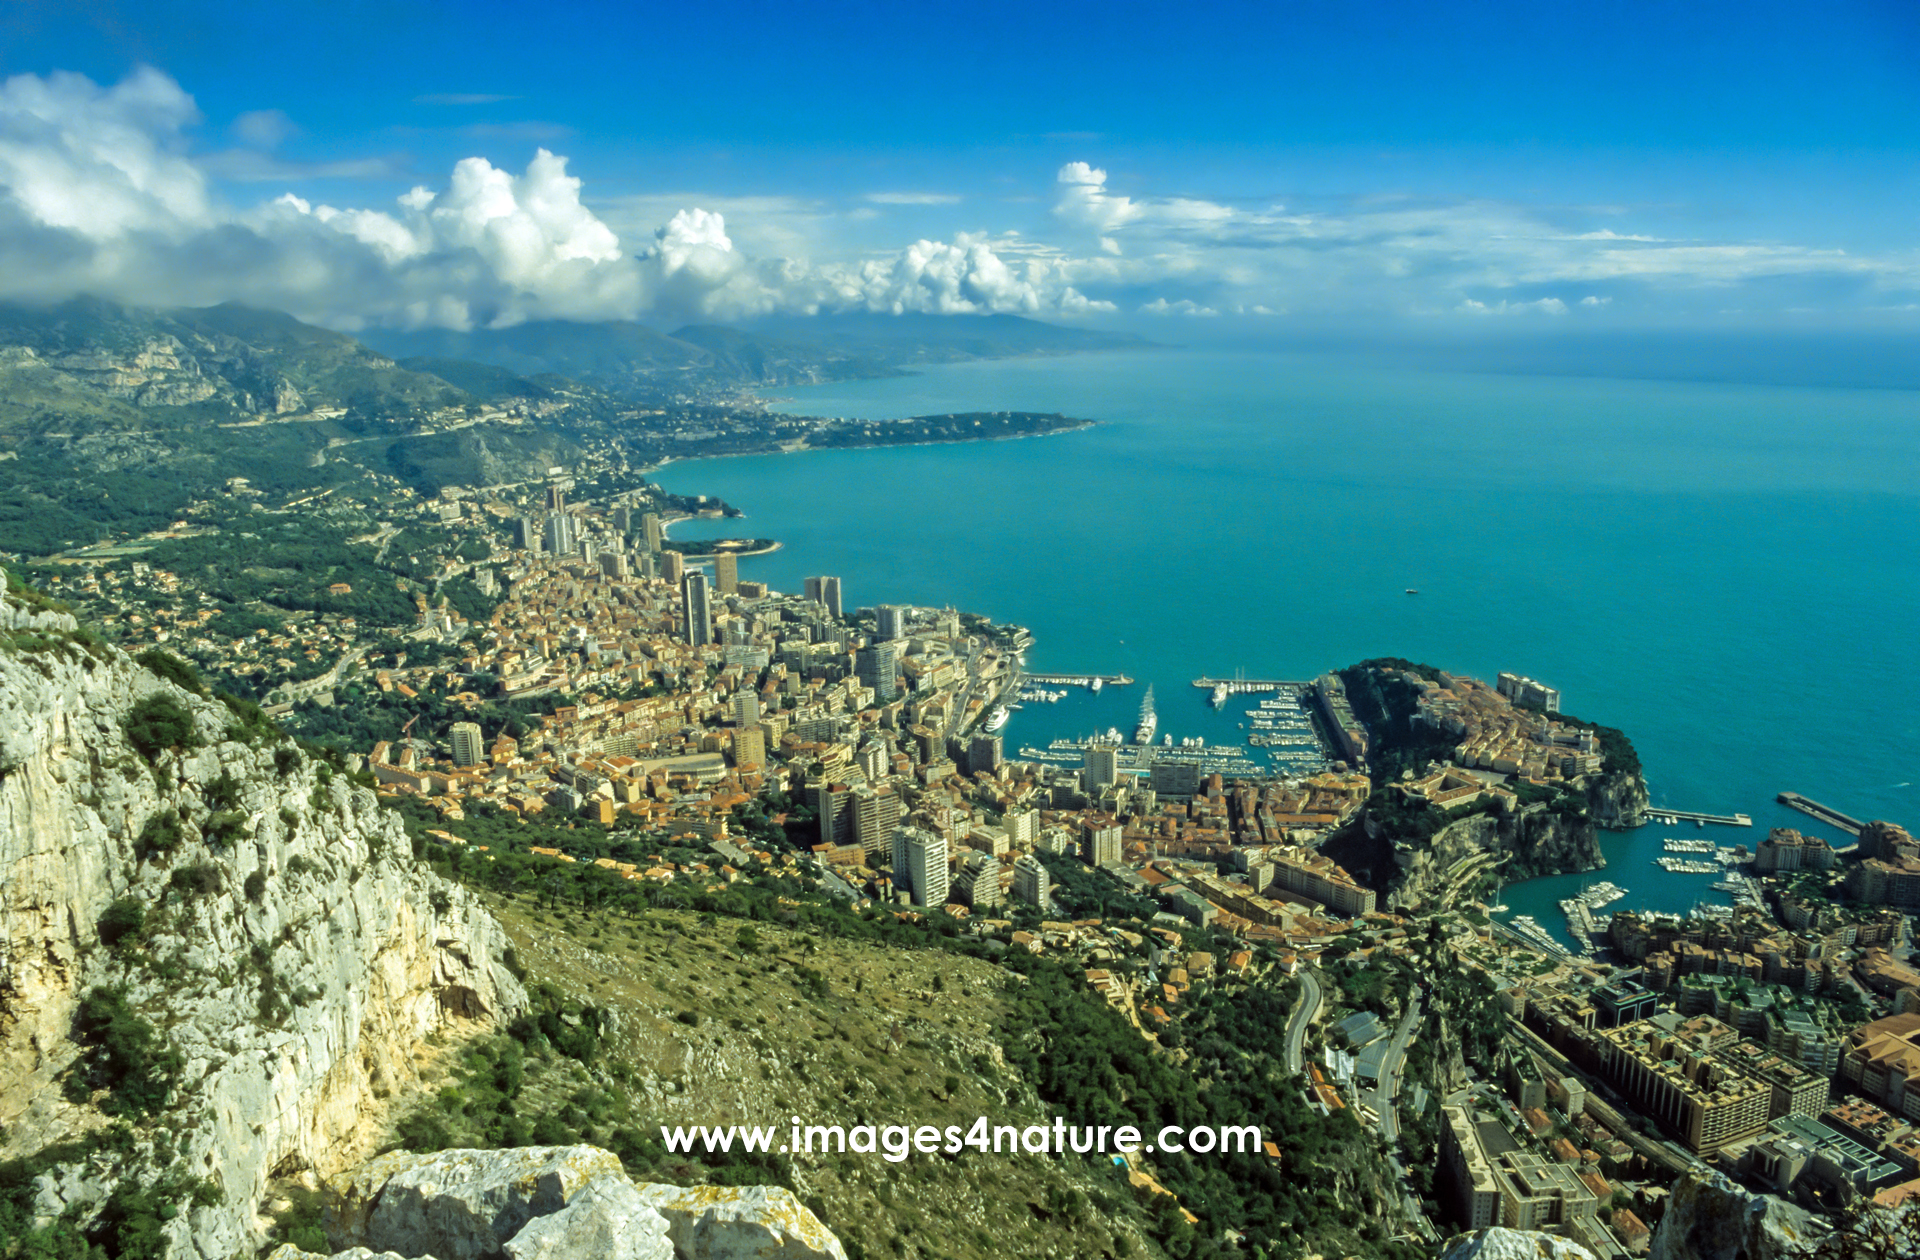 View over the city of Monaco and coastline from above